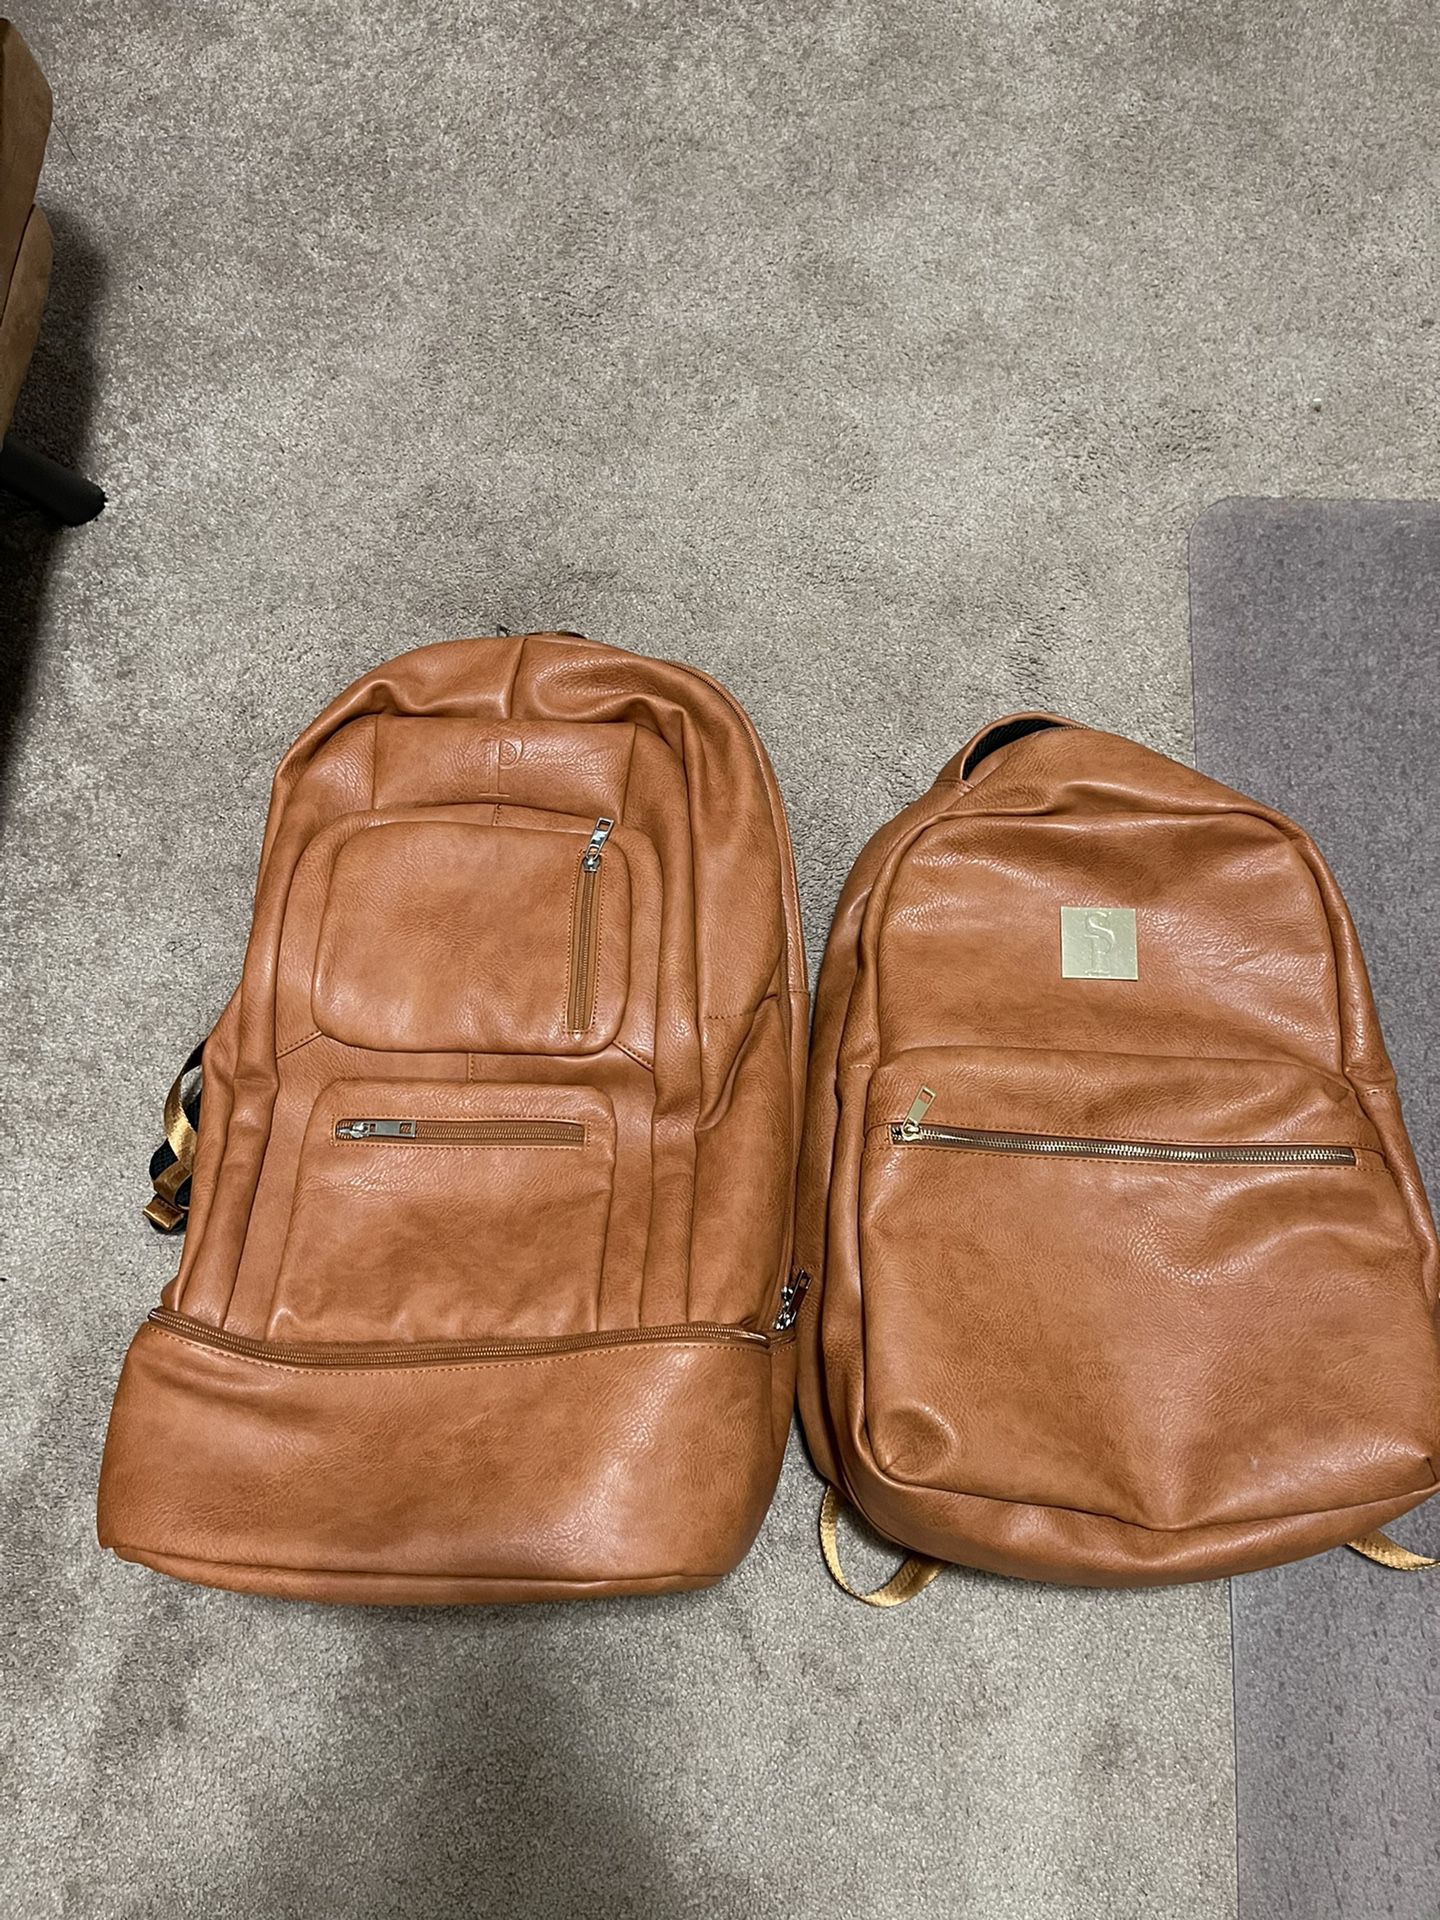 Sole Premise Sneaker Bag and Backpack 